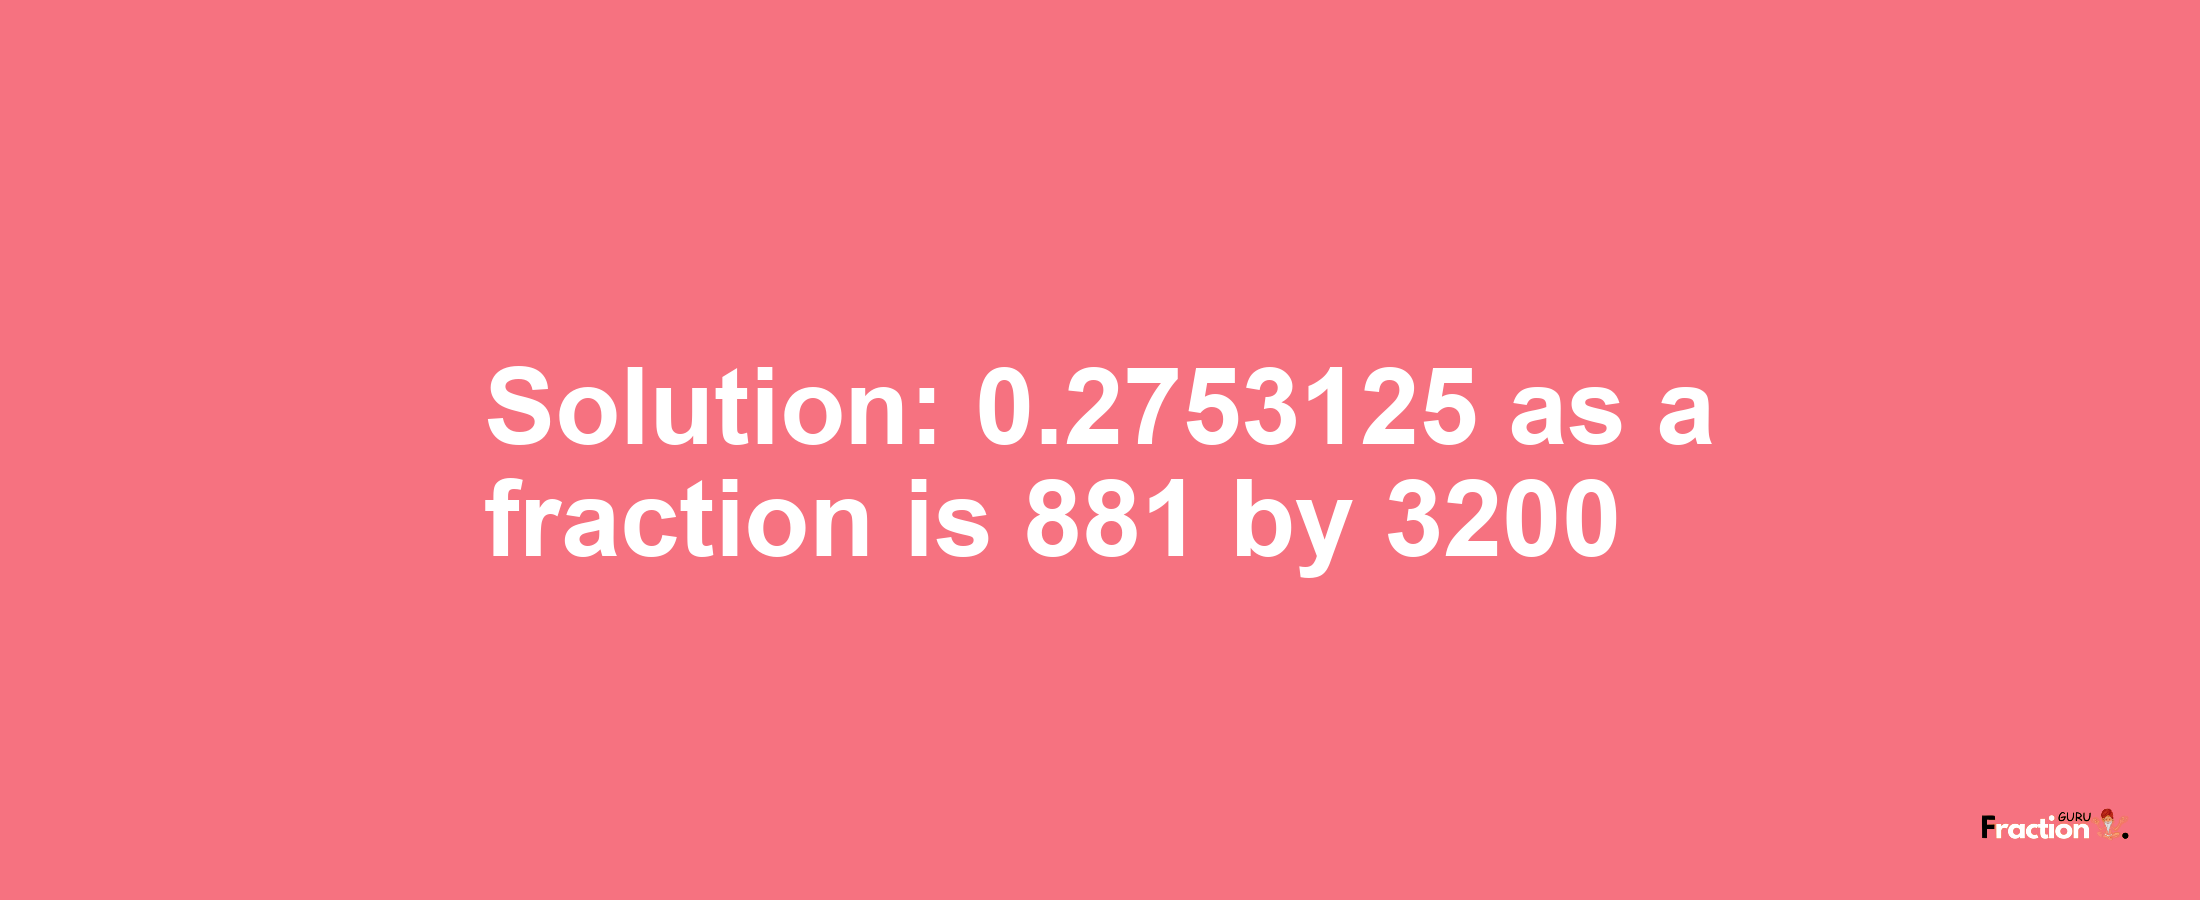 Solution:0.2753125 as a fraction is 881/3200